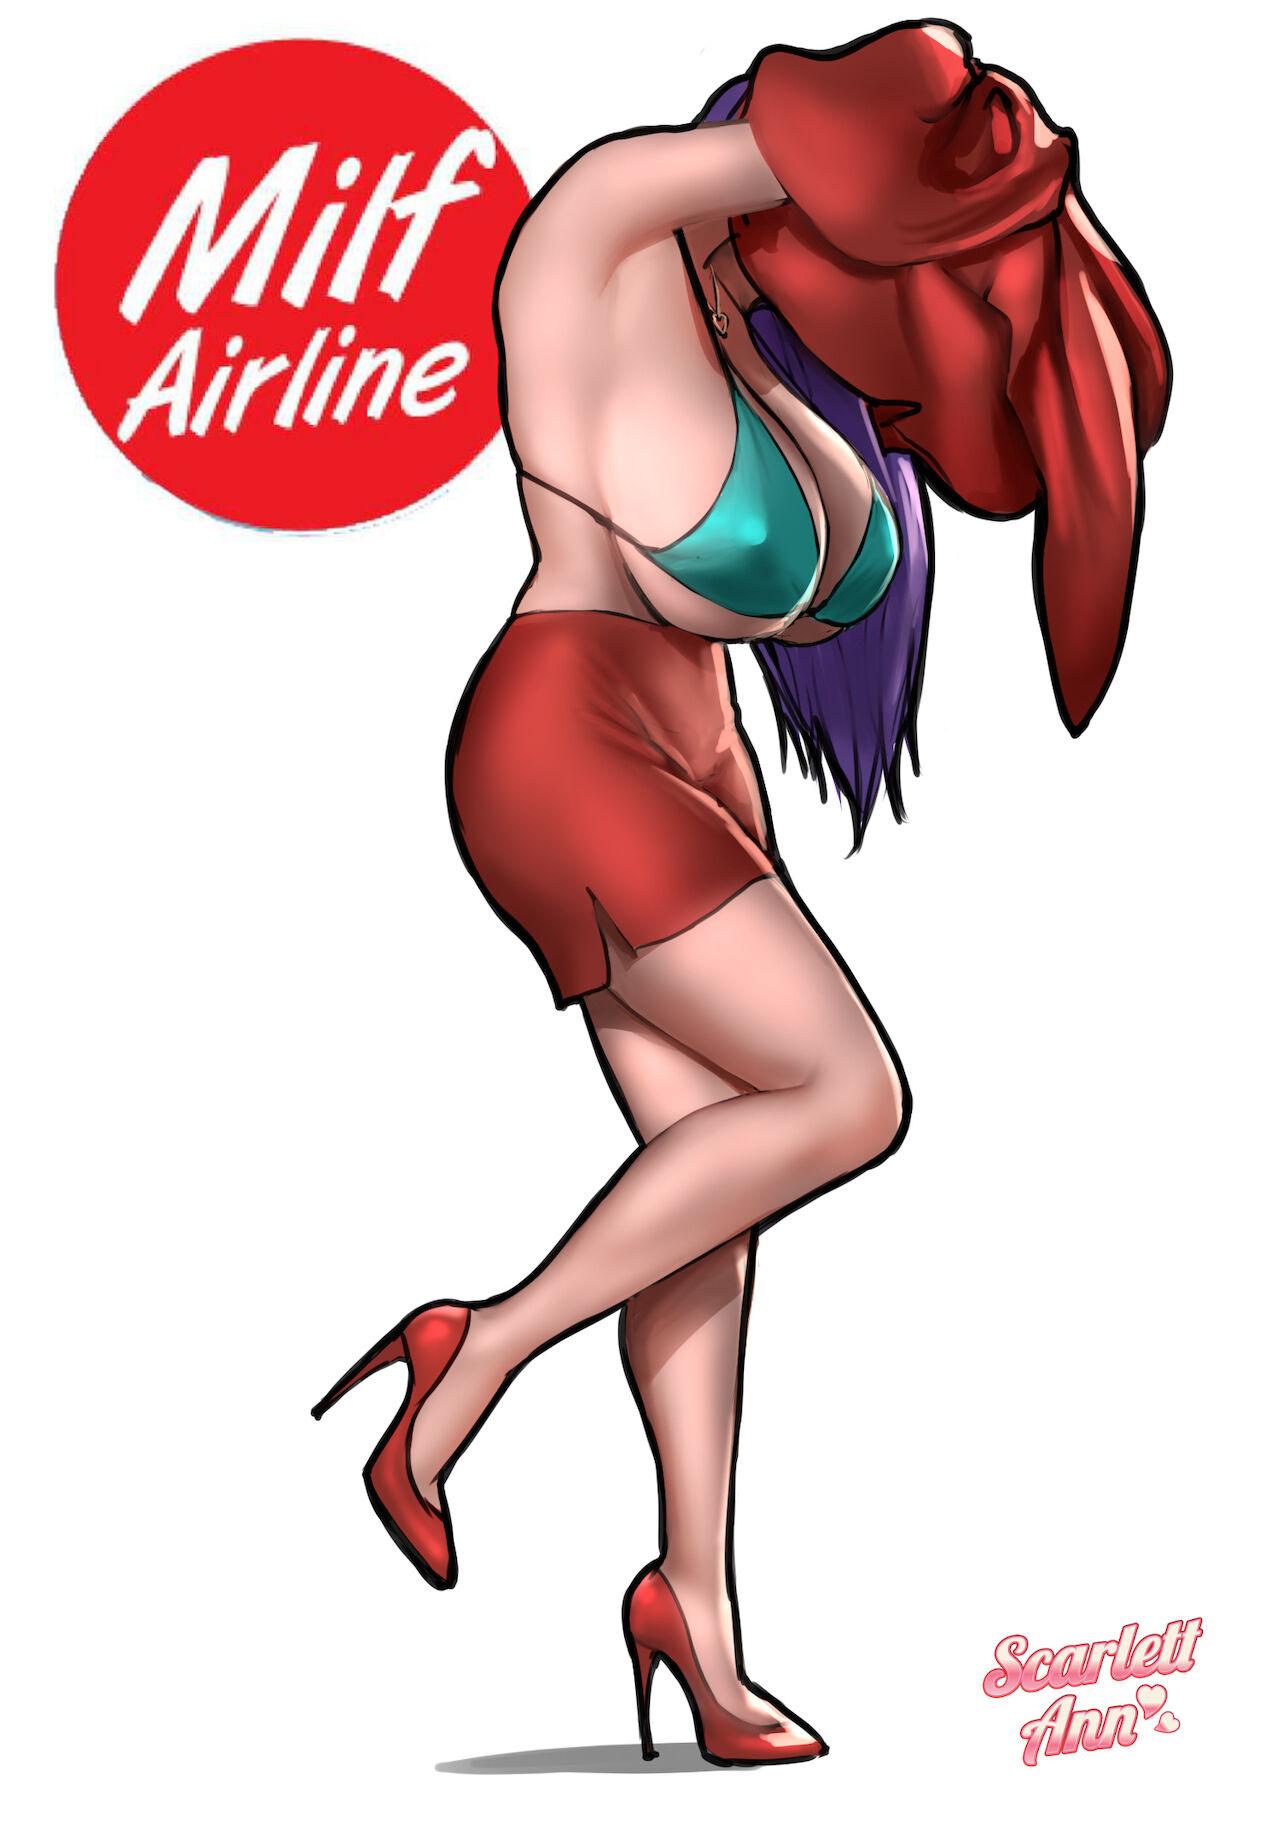 Milf Airlines 89